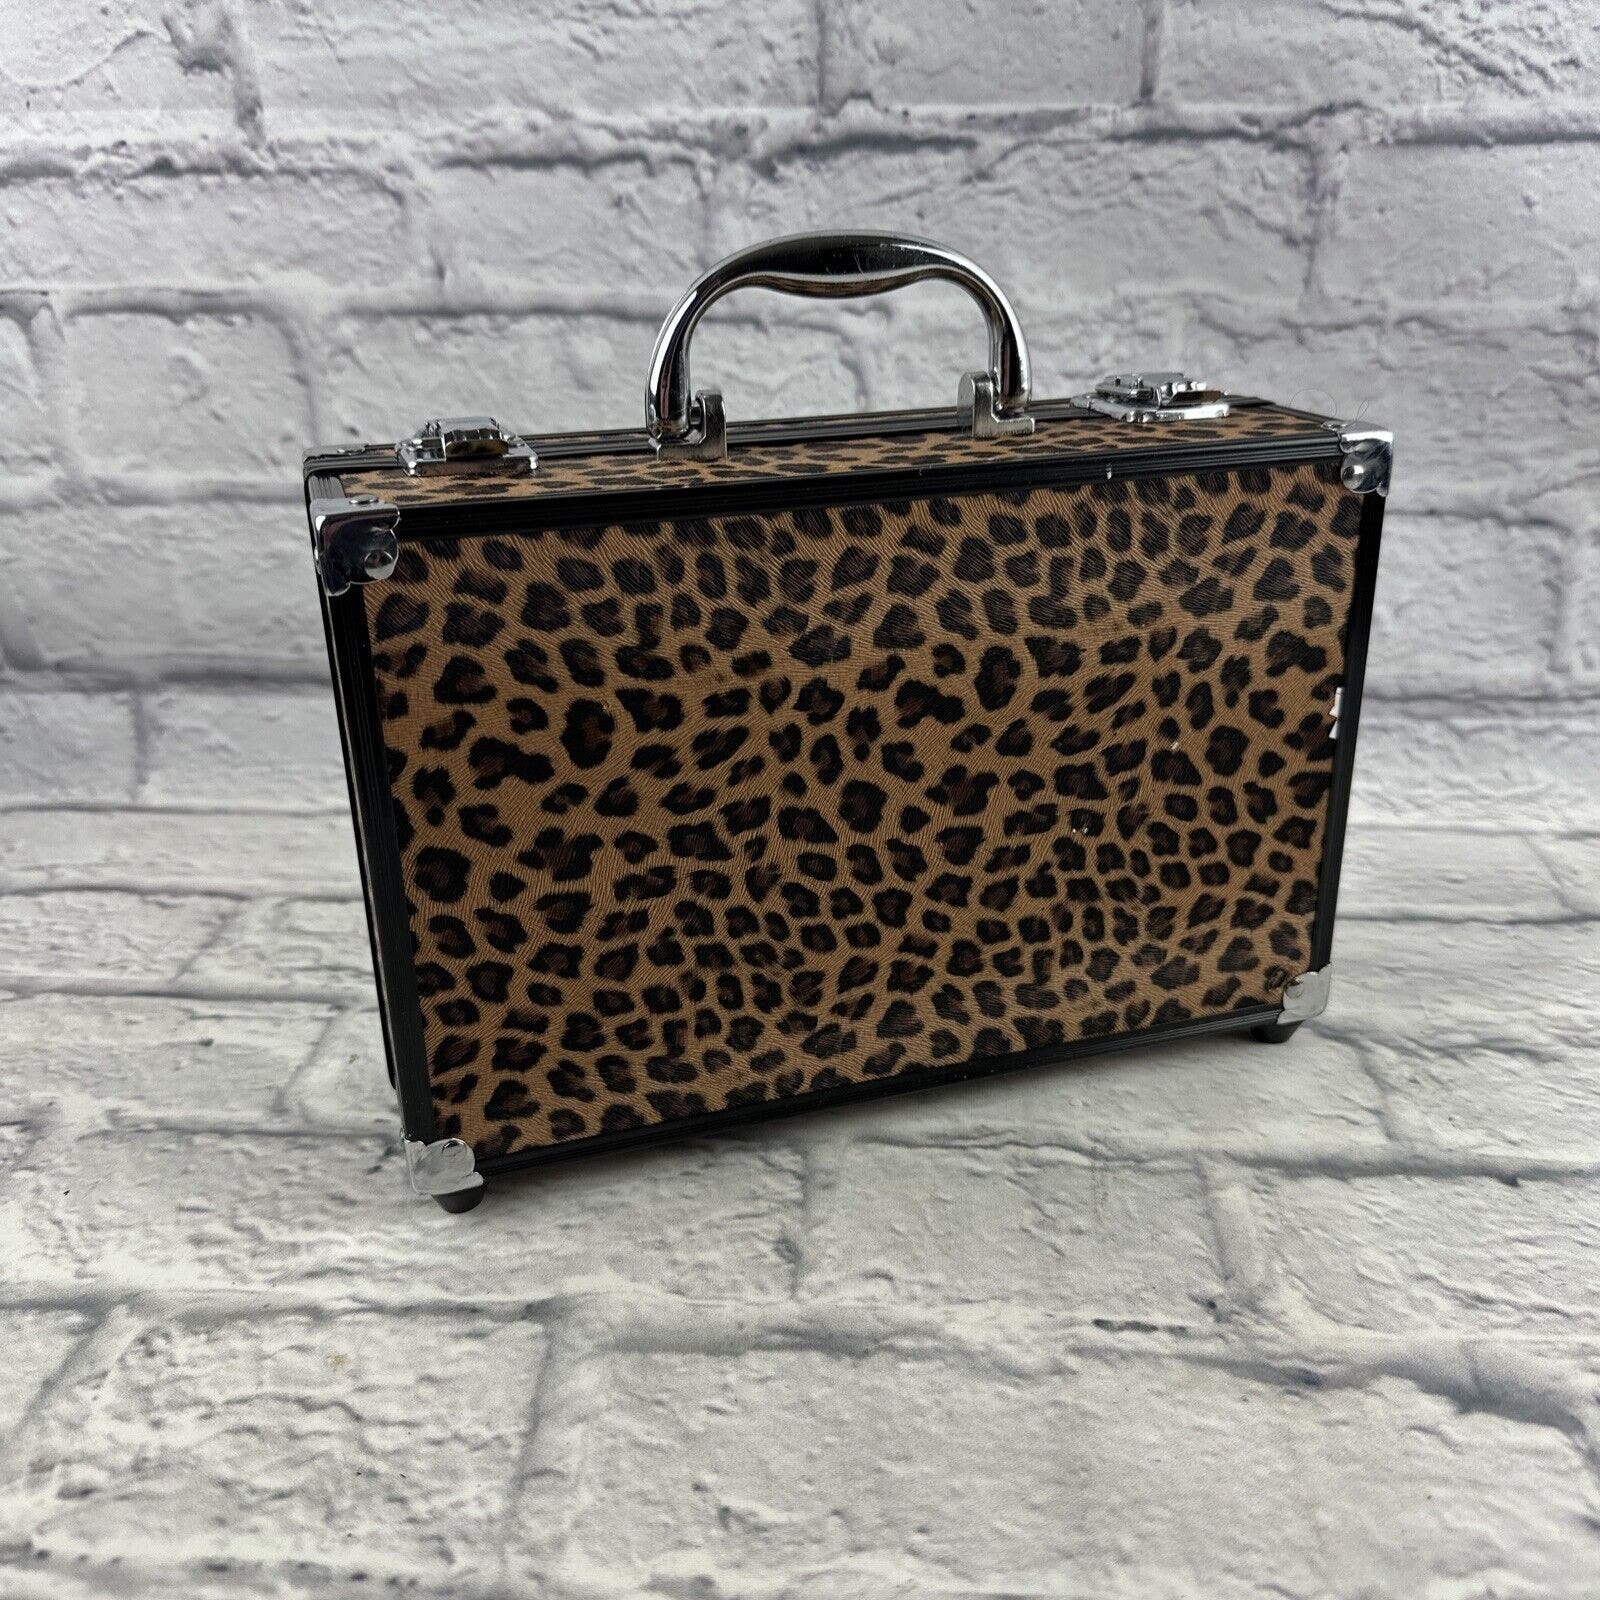 Leopard Print Makeup Hard Case. Unbranded. 10” By 6” By